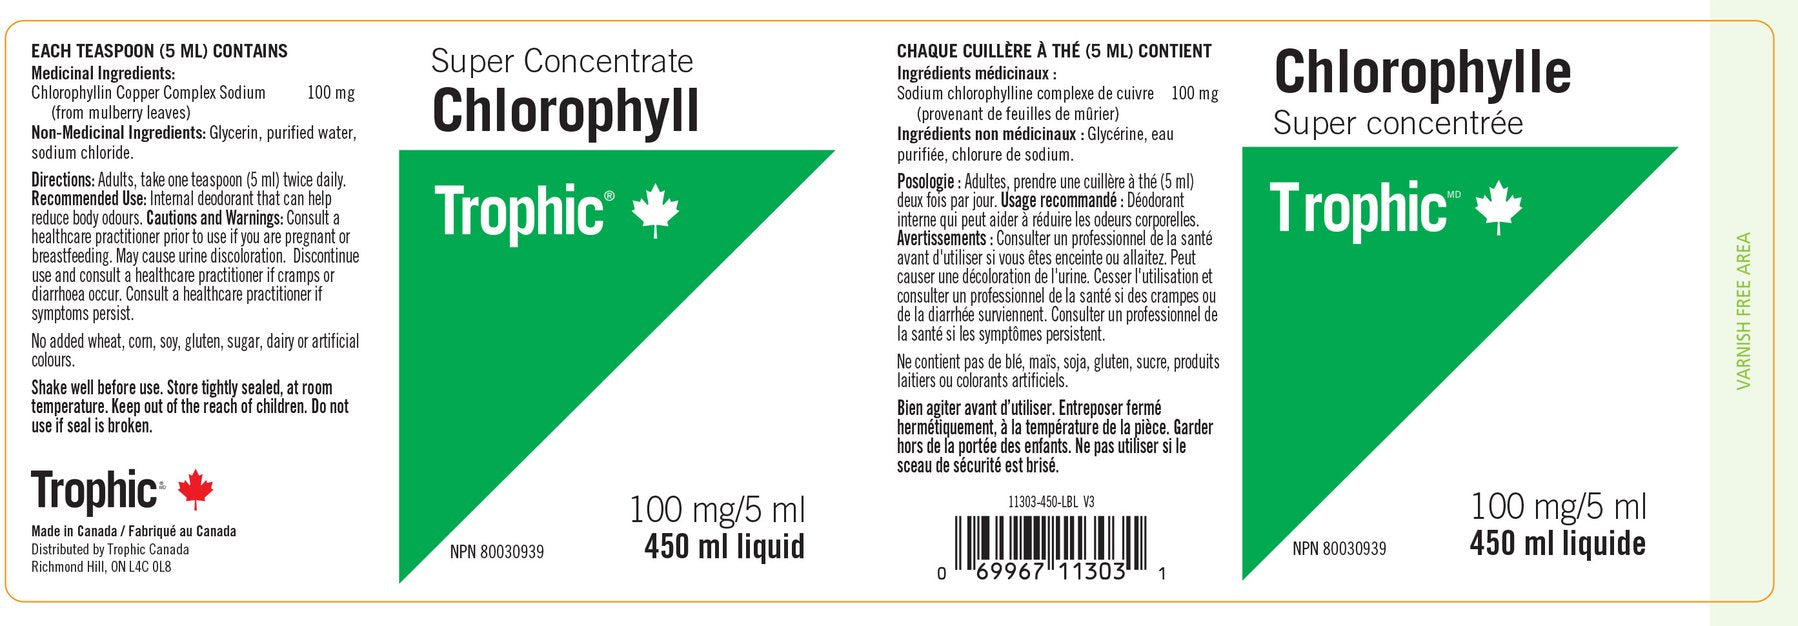 Trophic Chlorophyll Super Concentrate (450ml) - Lifestyle Markets